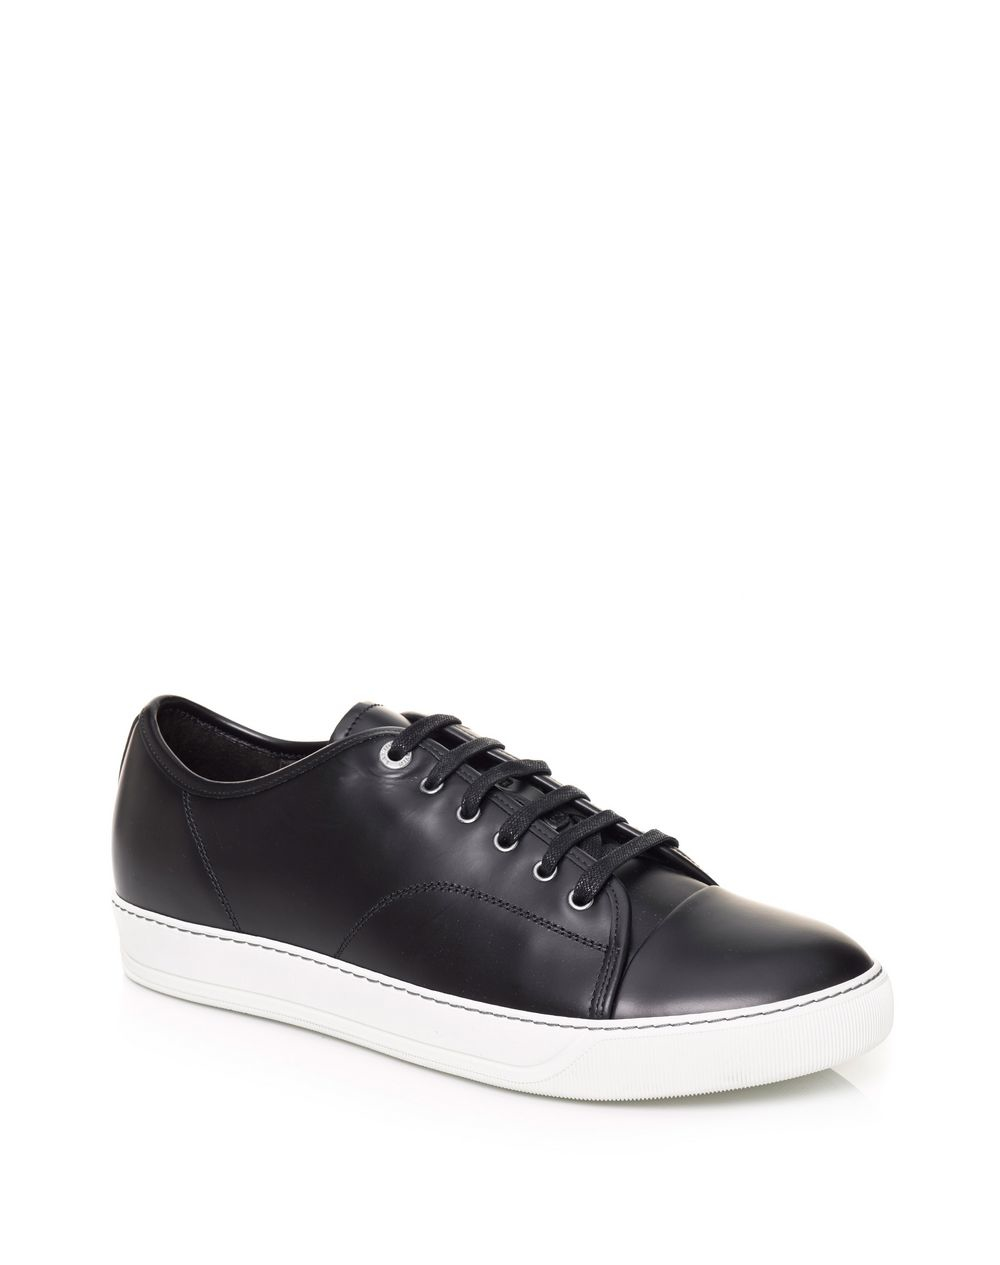 Lanvin Leather Low-Top Sneakers in Black for Men | Lyst